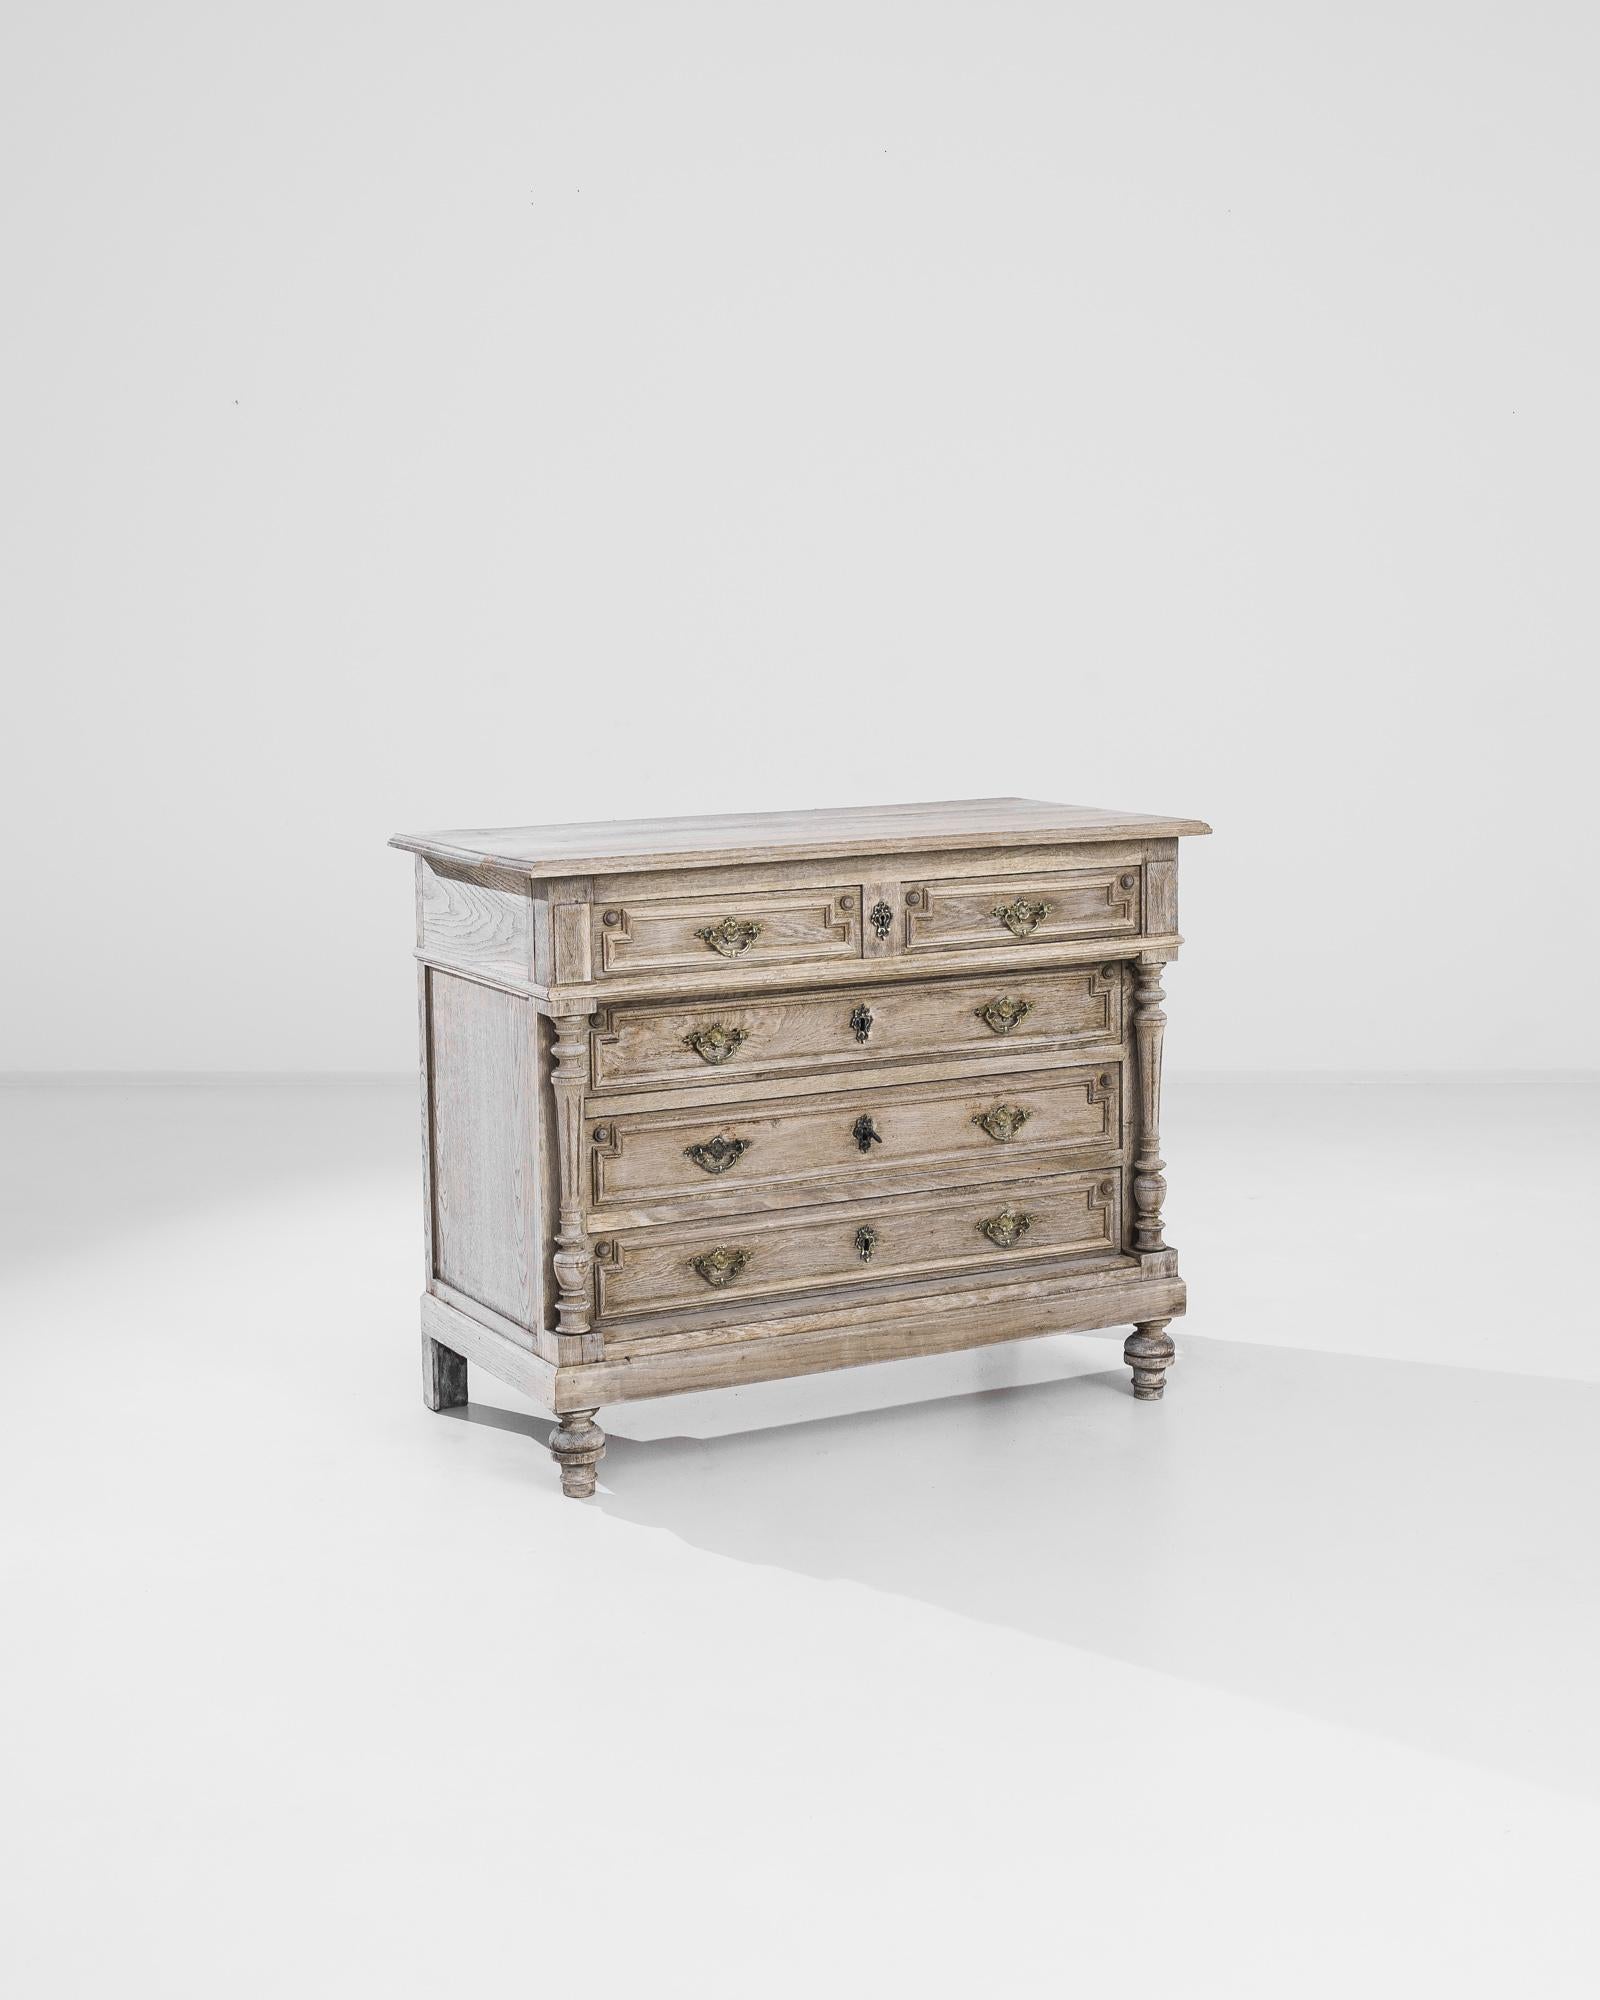 An oak chest of drawers from turn of the century France. Elaborate columns create a Neo Renaissance aesthetic, their intricate contours framing the right-angled paneling of the drawers. Gilded lock pieces and drawer handles in the shape of crests